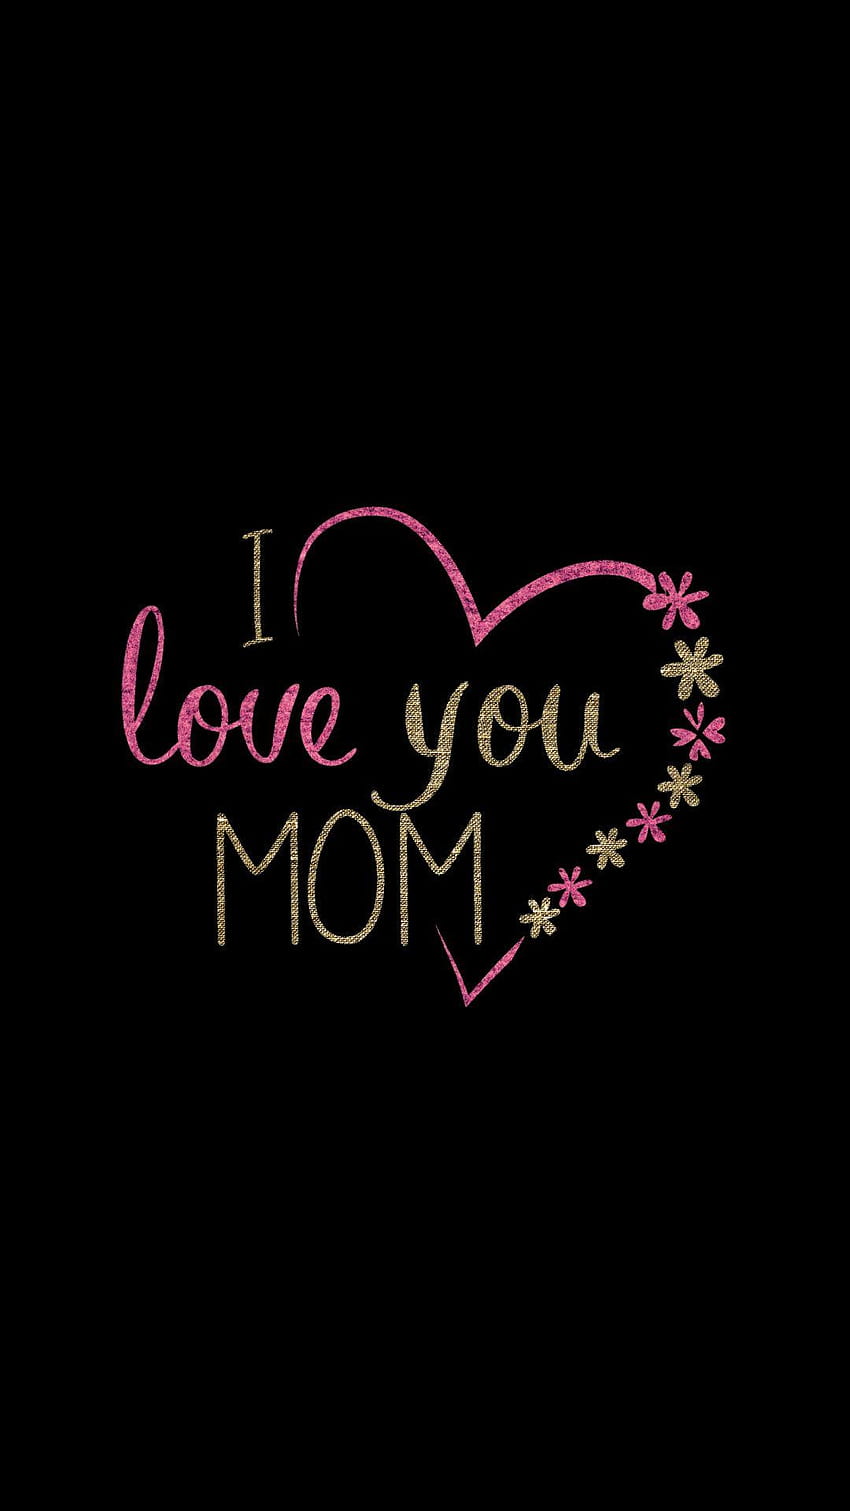 Valentines day, Mother, heart, graphic design, i miss you mom HD ...